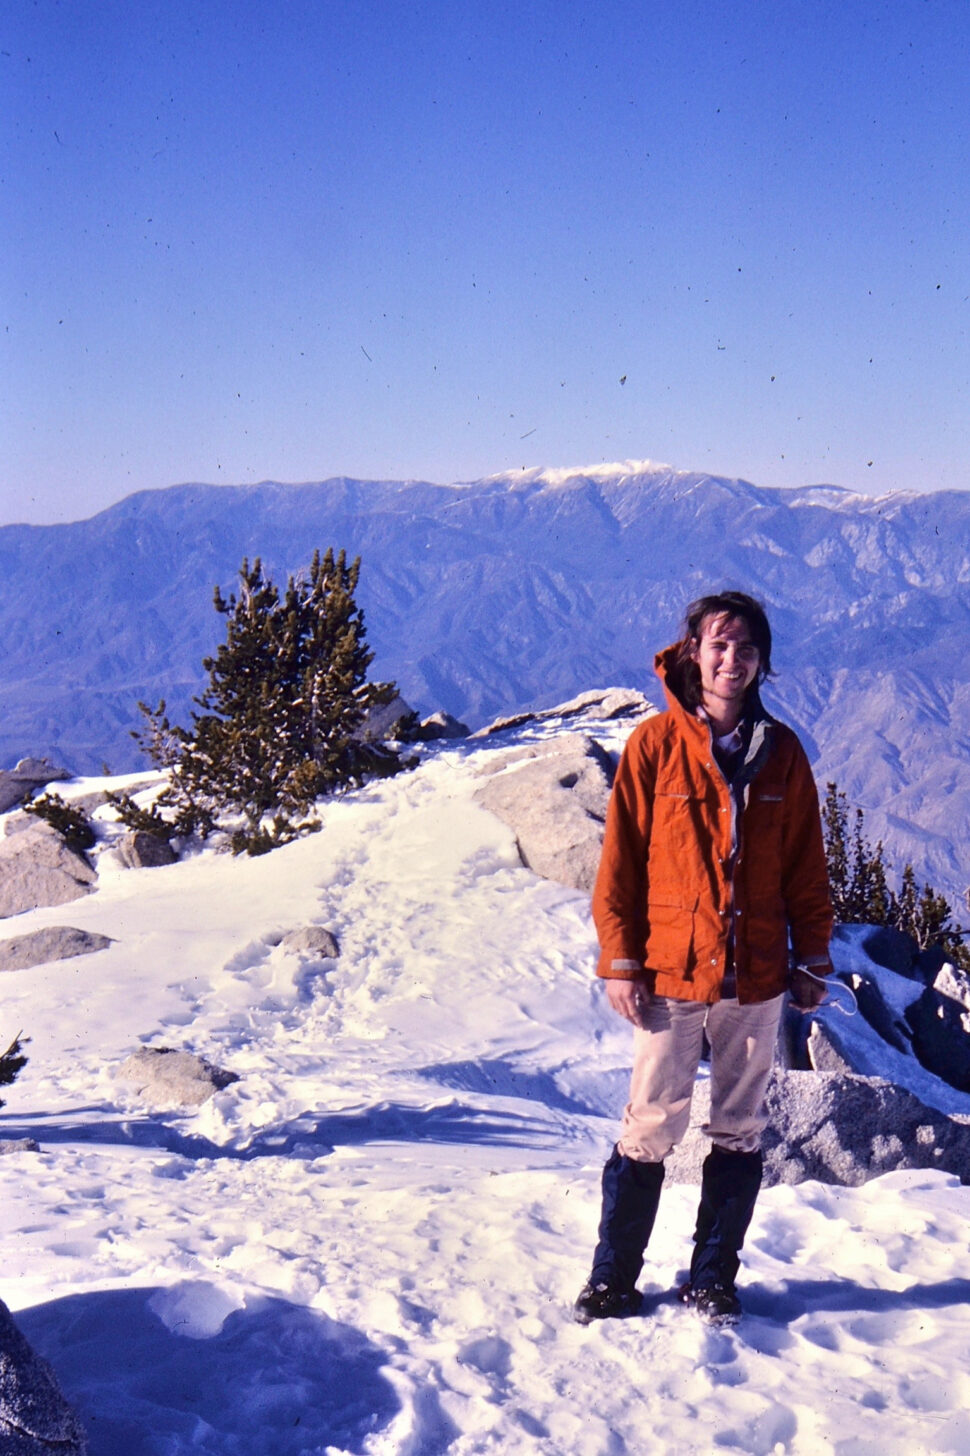 A young man stands on a snowy peak with mountains in the background while wearing an orange jacket.